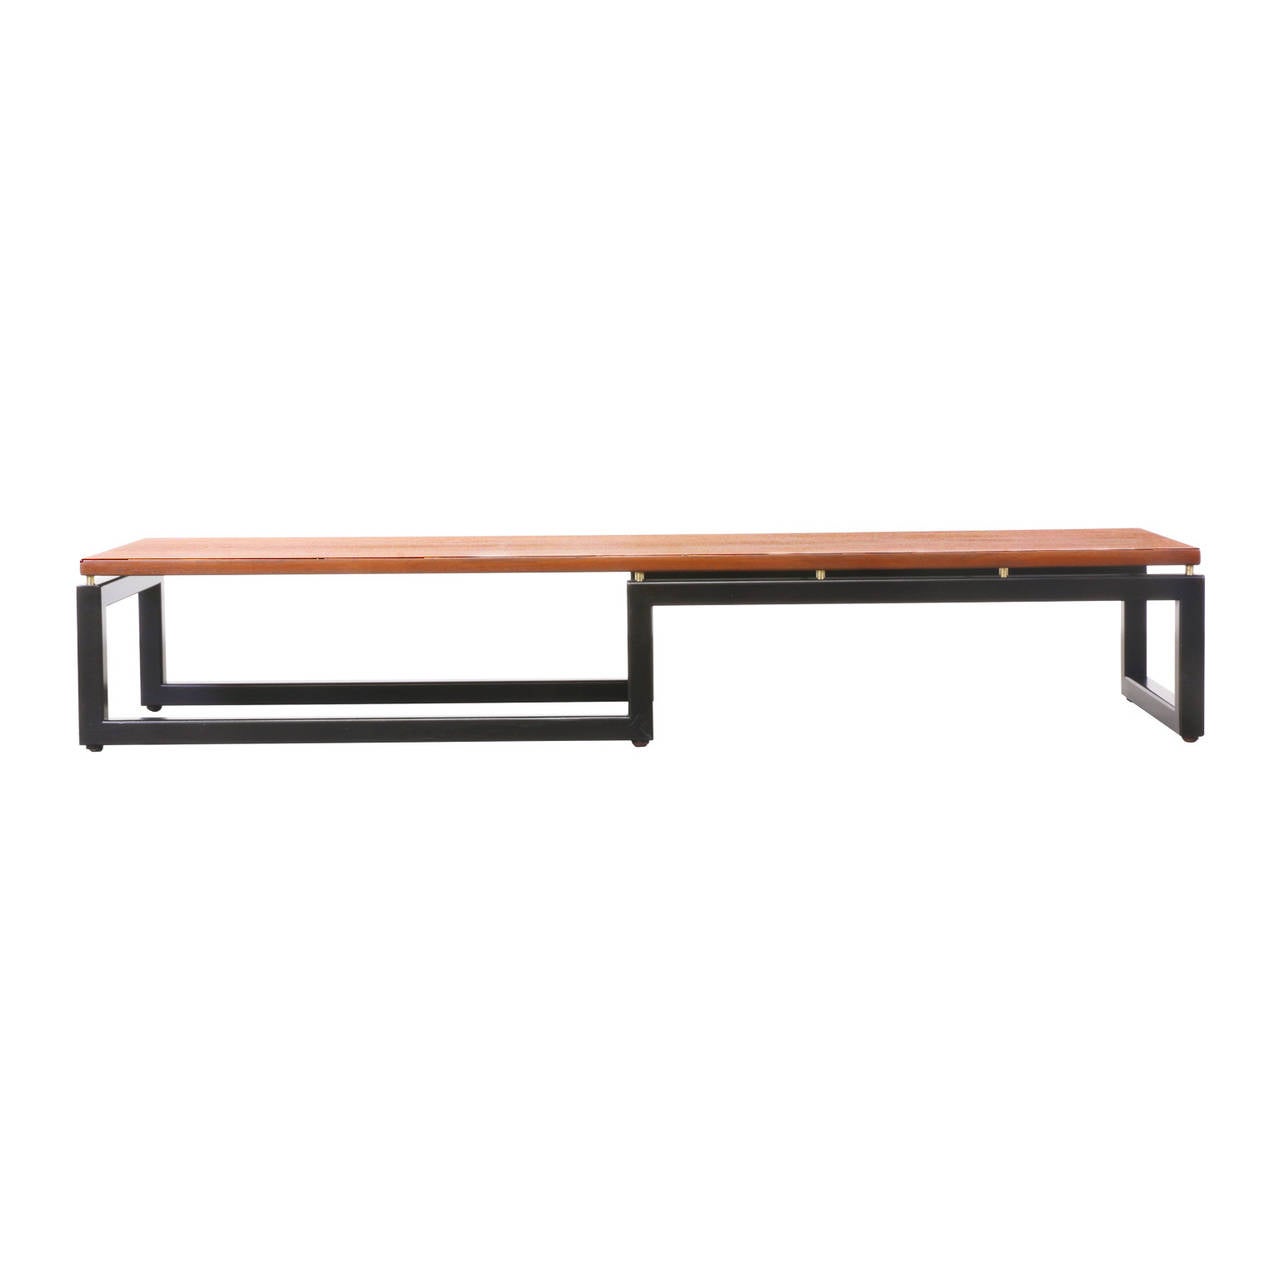 Designer: Michael Taylor
Manufacturer: Baker “New World”
Period/Style: Mid Century Modern
Country: United States
Date: 1950’s

Dimensions: 11.5″H x 65.5″L x 18″W
Materials: Teak, Brass, Lacquered Wood
Condition: Excellent – Newly